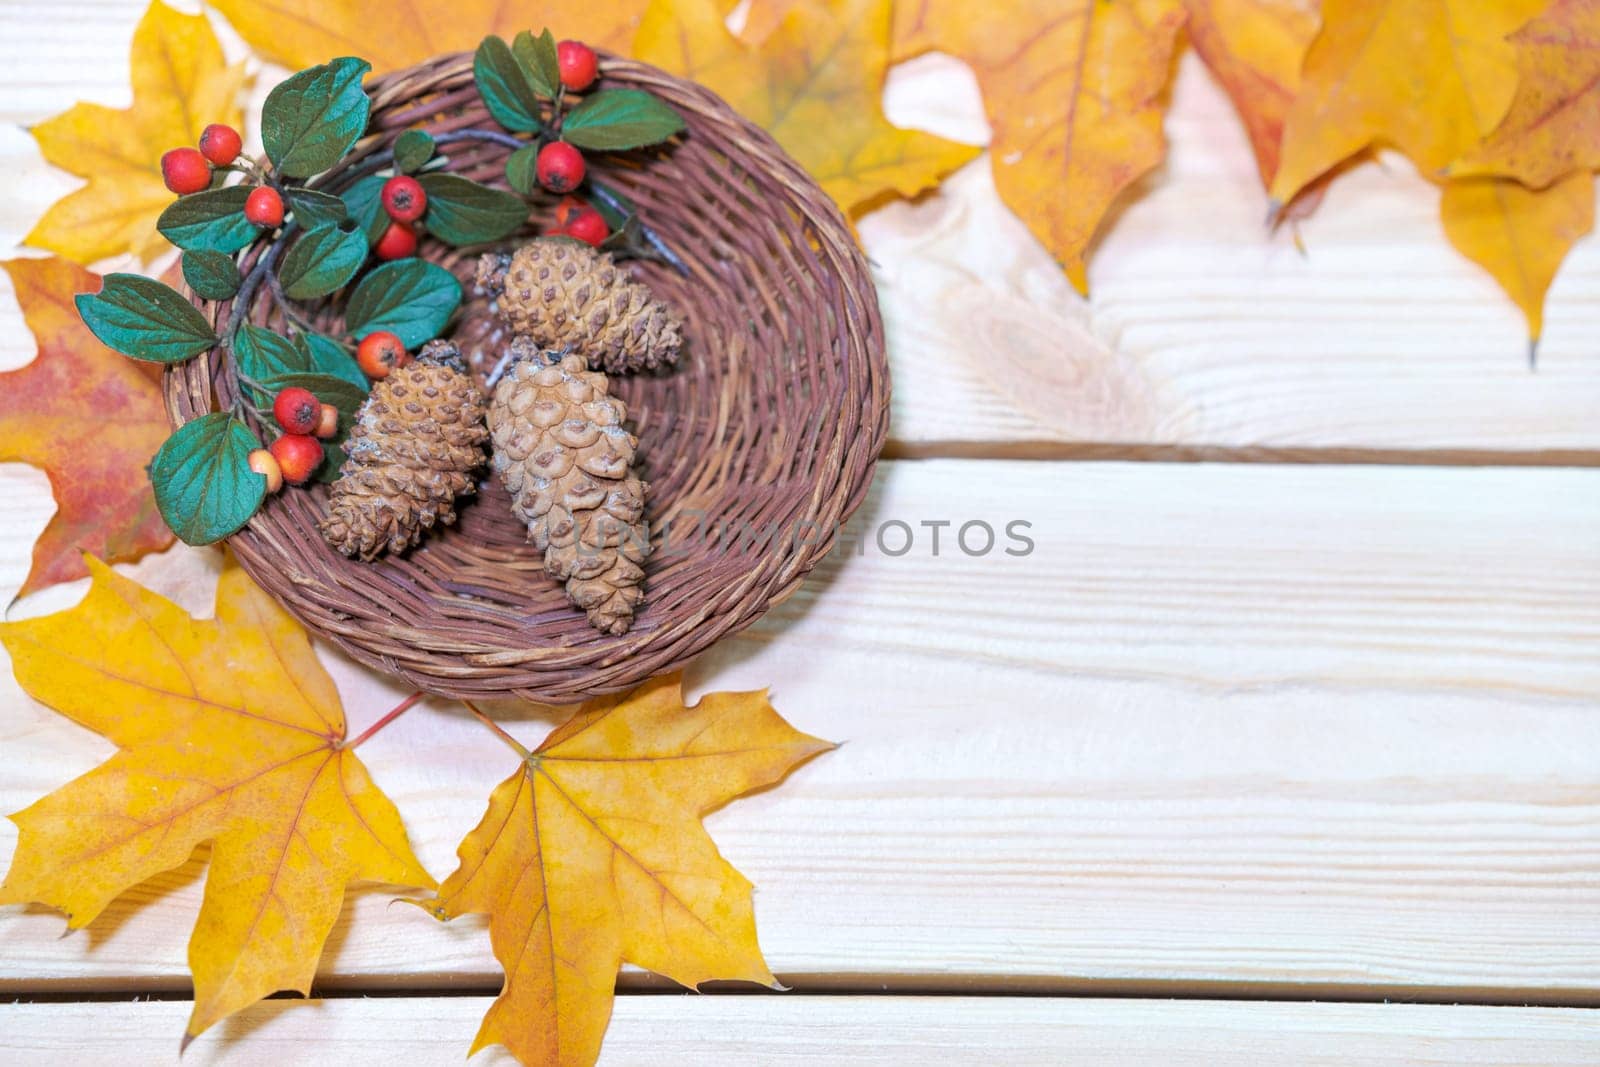 Nature, season and botany concept frame of dry autumn leaves, cones in a basket and red berries on a light wooden background, autumn postcard